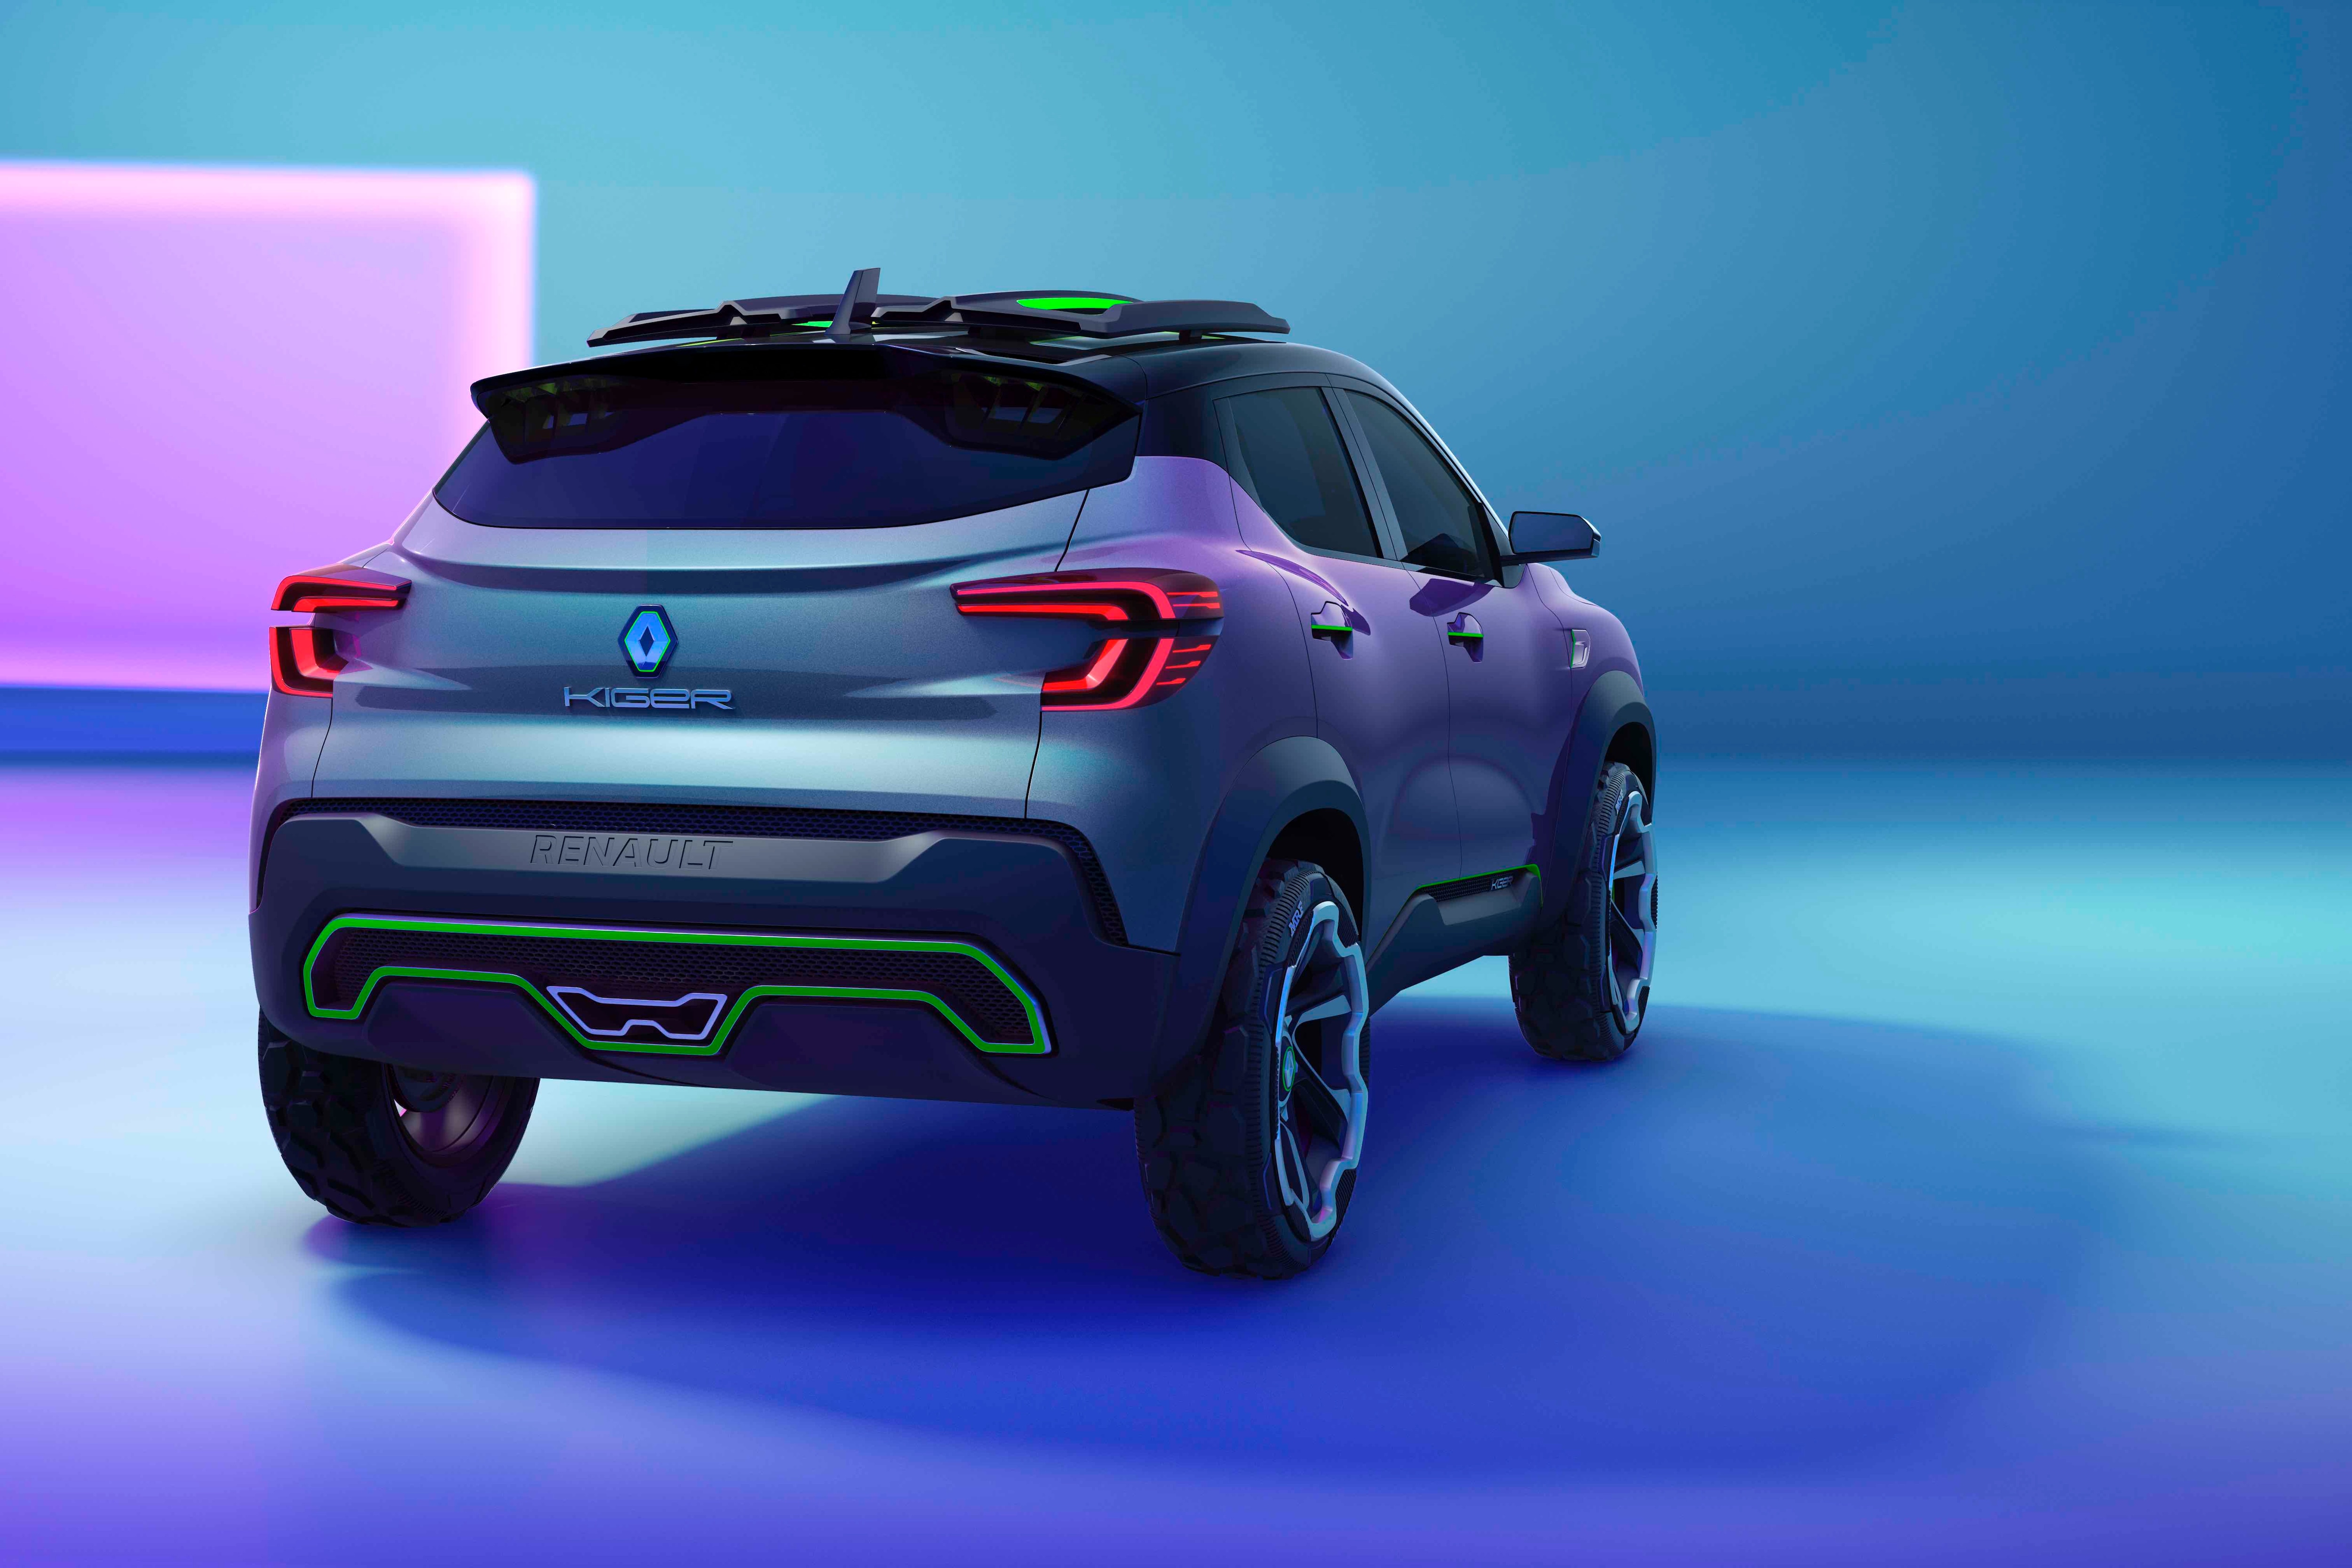 The rear profile of the concept Renault Kiger showcased previously.